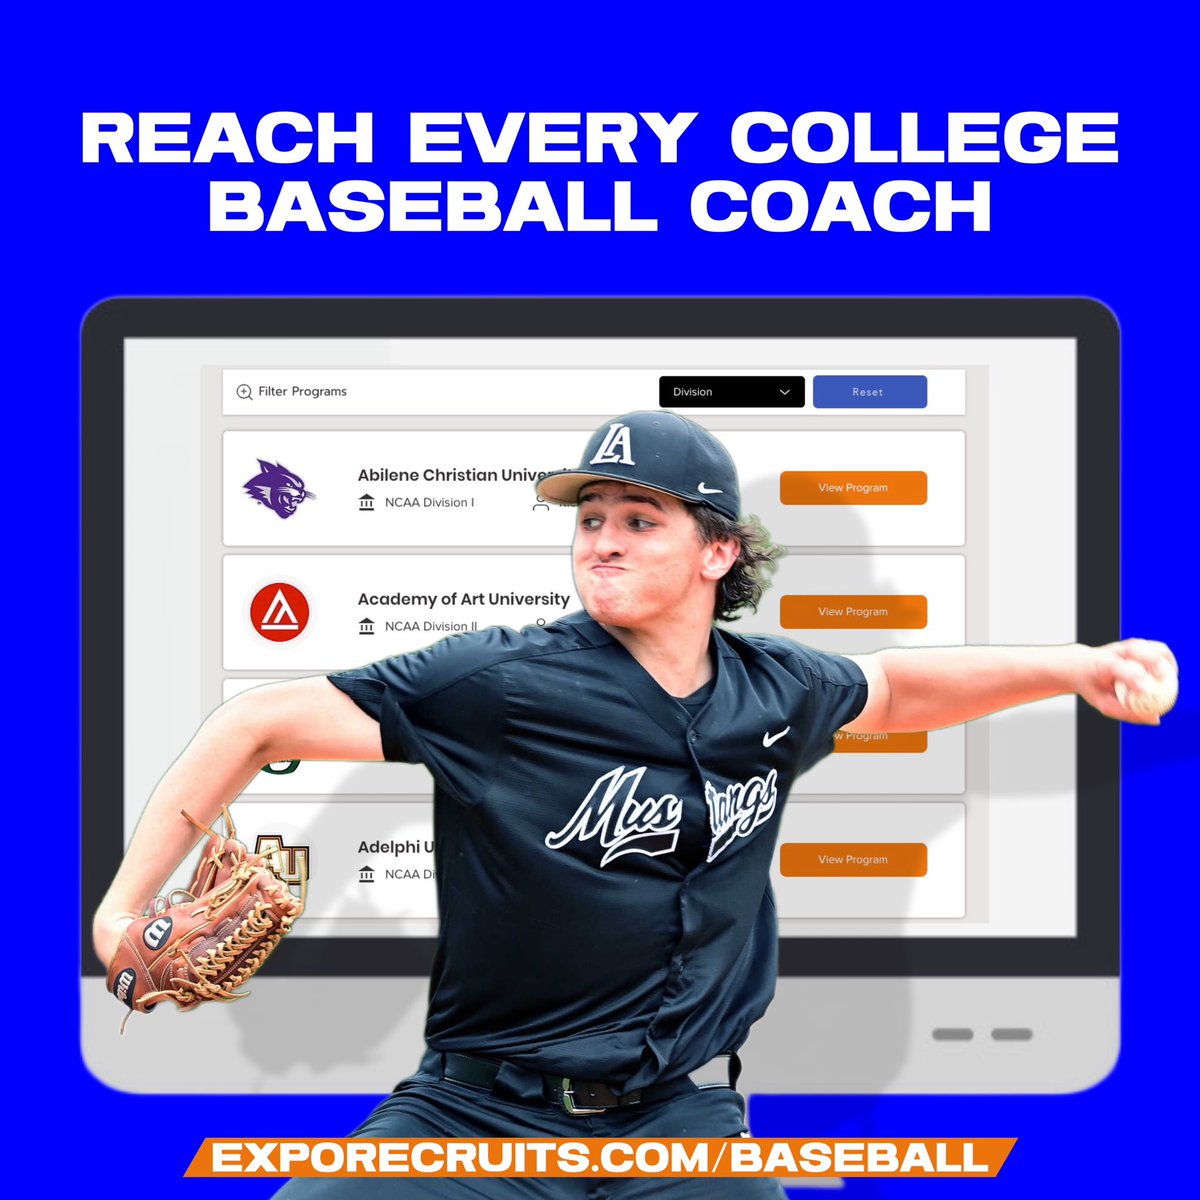 🚨 Take your recruitment to the 𝗡𝗘𝗫𝗧 level! ✔️ Send film to every program ✔️ Access & download list ✔️ Social Media Promotion 👉 exporecruits.com/baseball